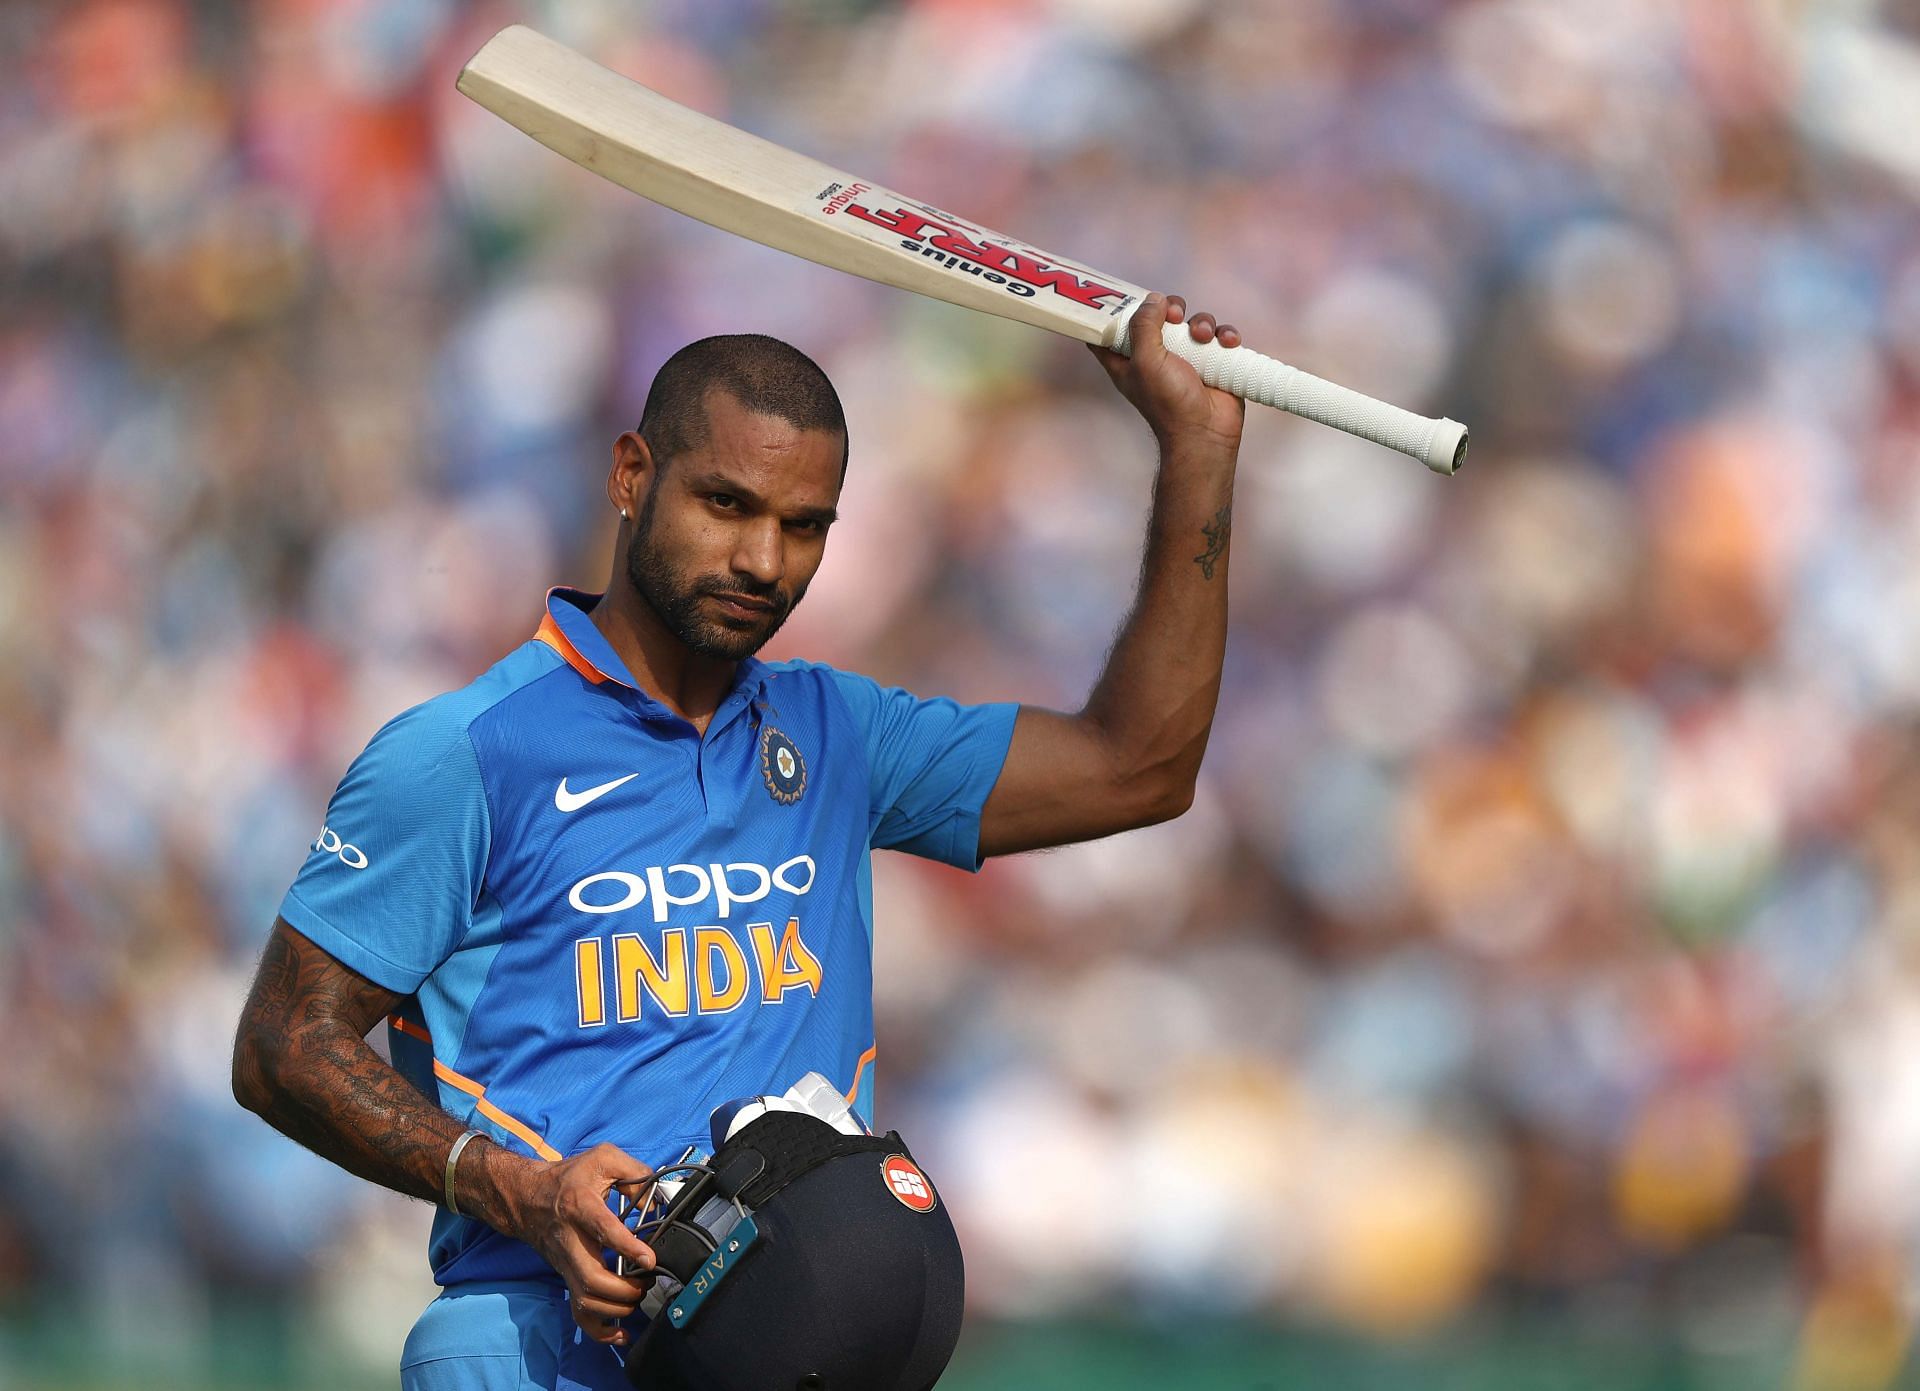 Shikhar Dhawan is a likely captaincy candidate for Punjab Kings ahead of IPL 2022.